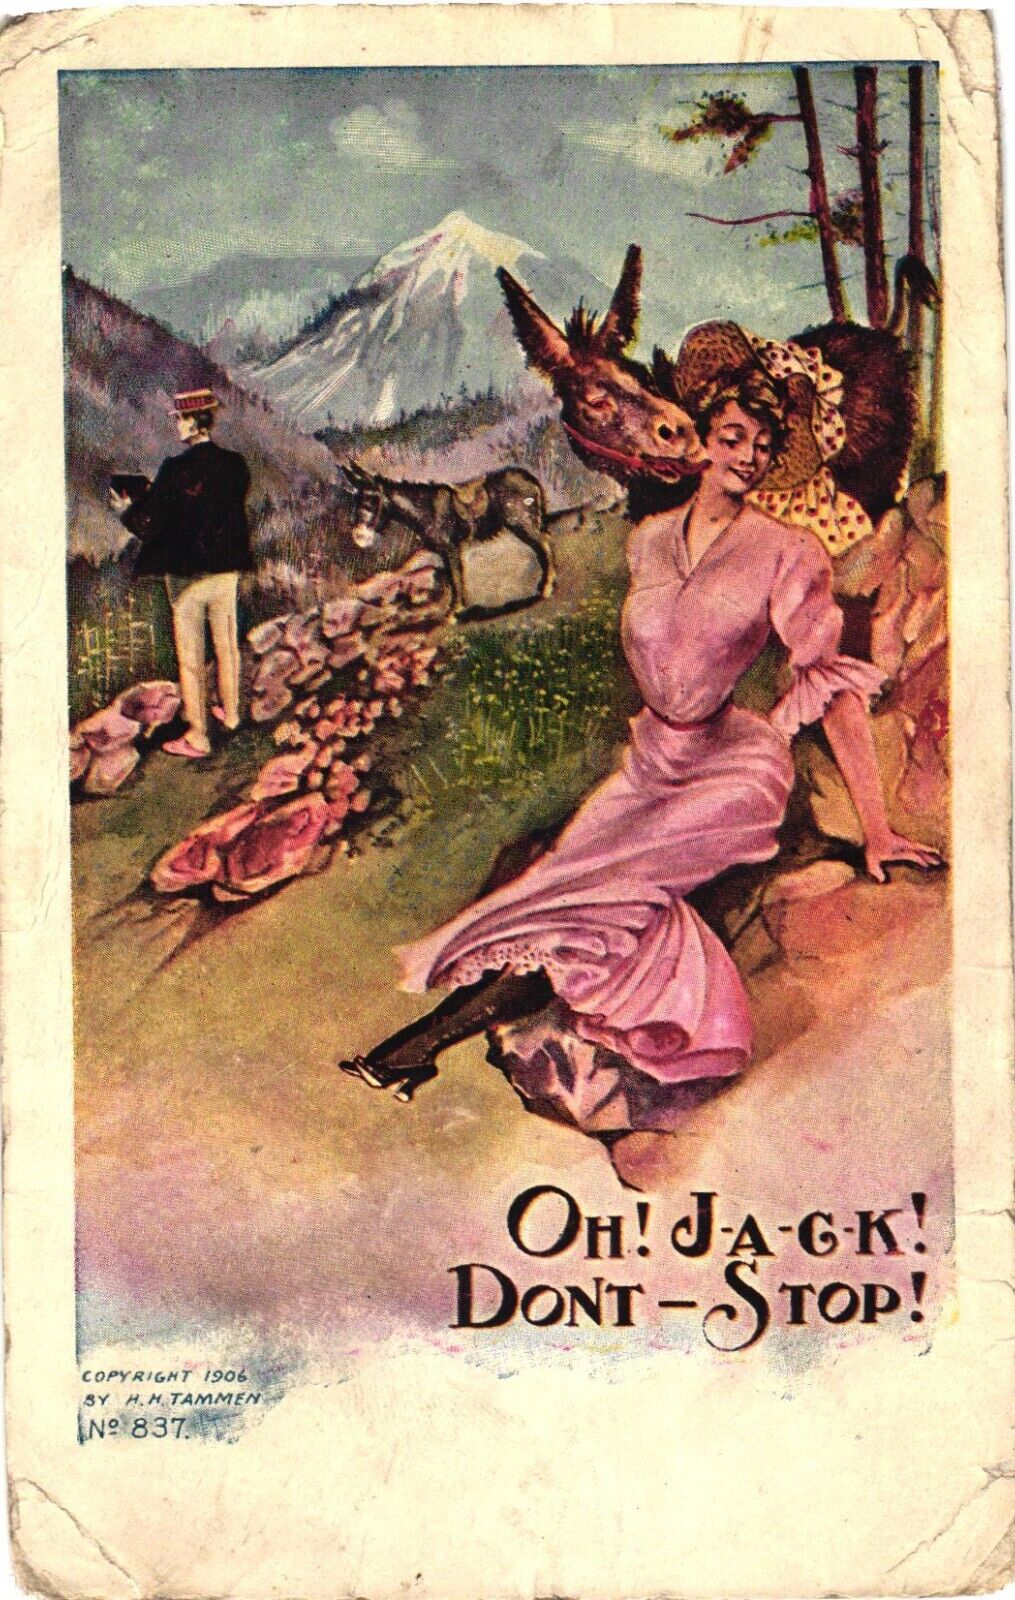 Woman Getting Licked By A Donkey On Outdoors, Oh J-a-c-k Don't-Stop Postcard